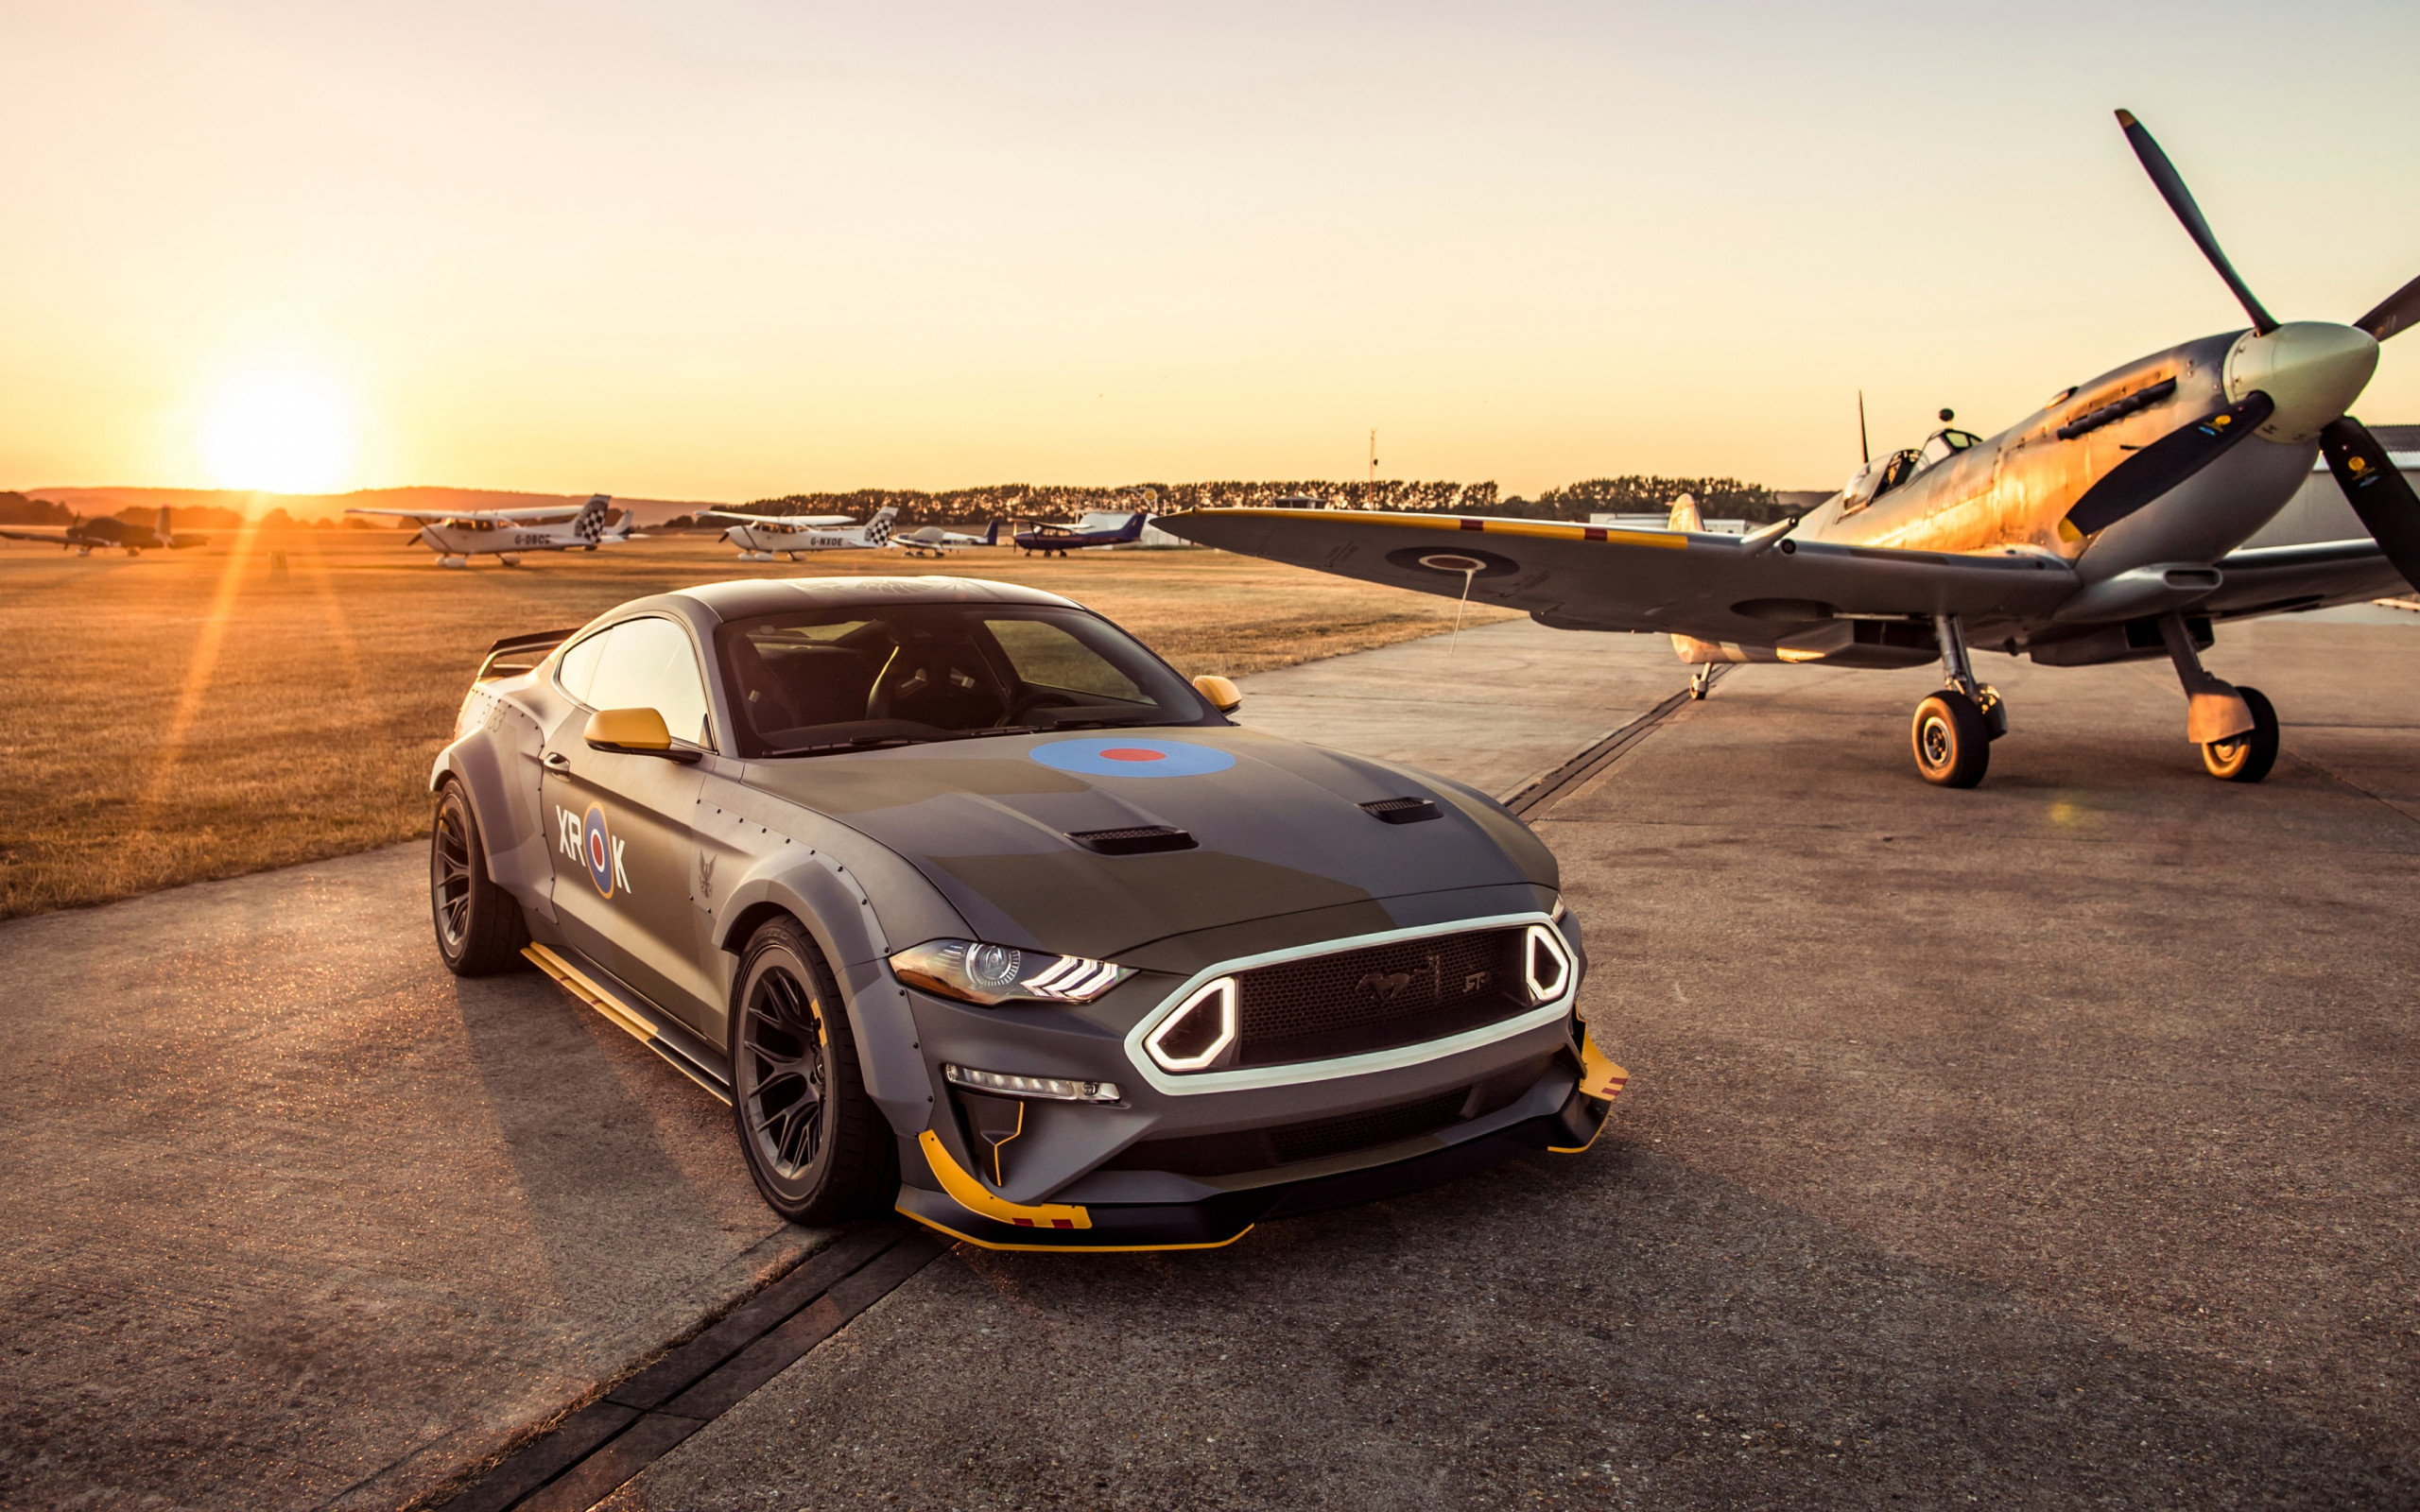 Ford Eagle Squadron Mustang GT wallpaper 2560x1600